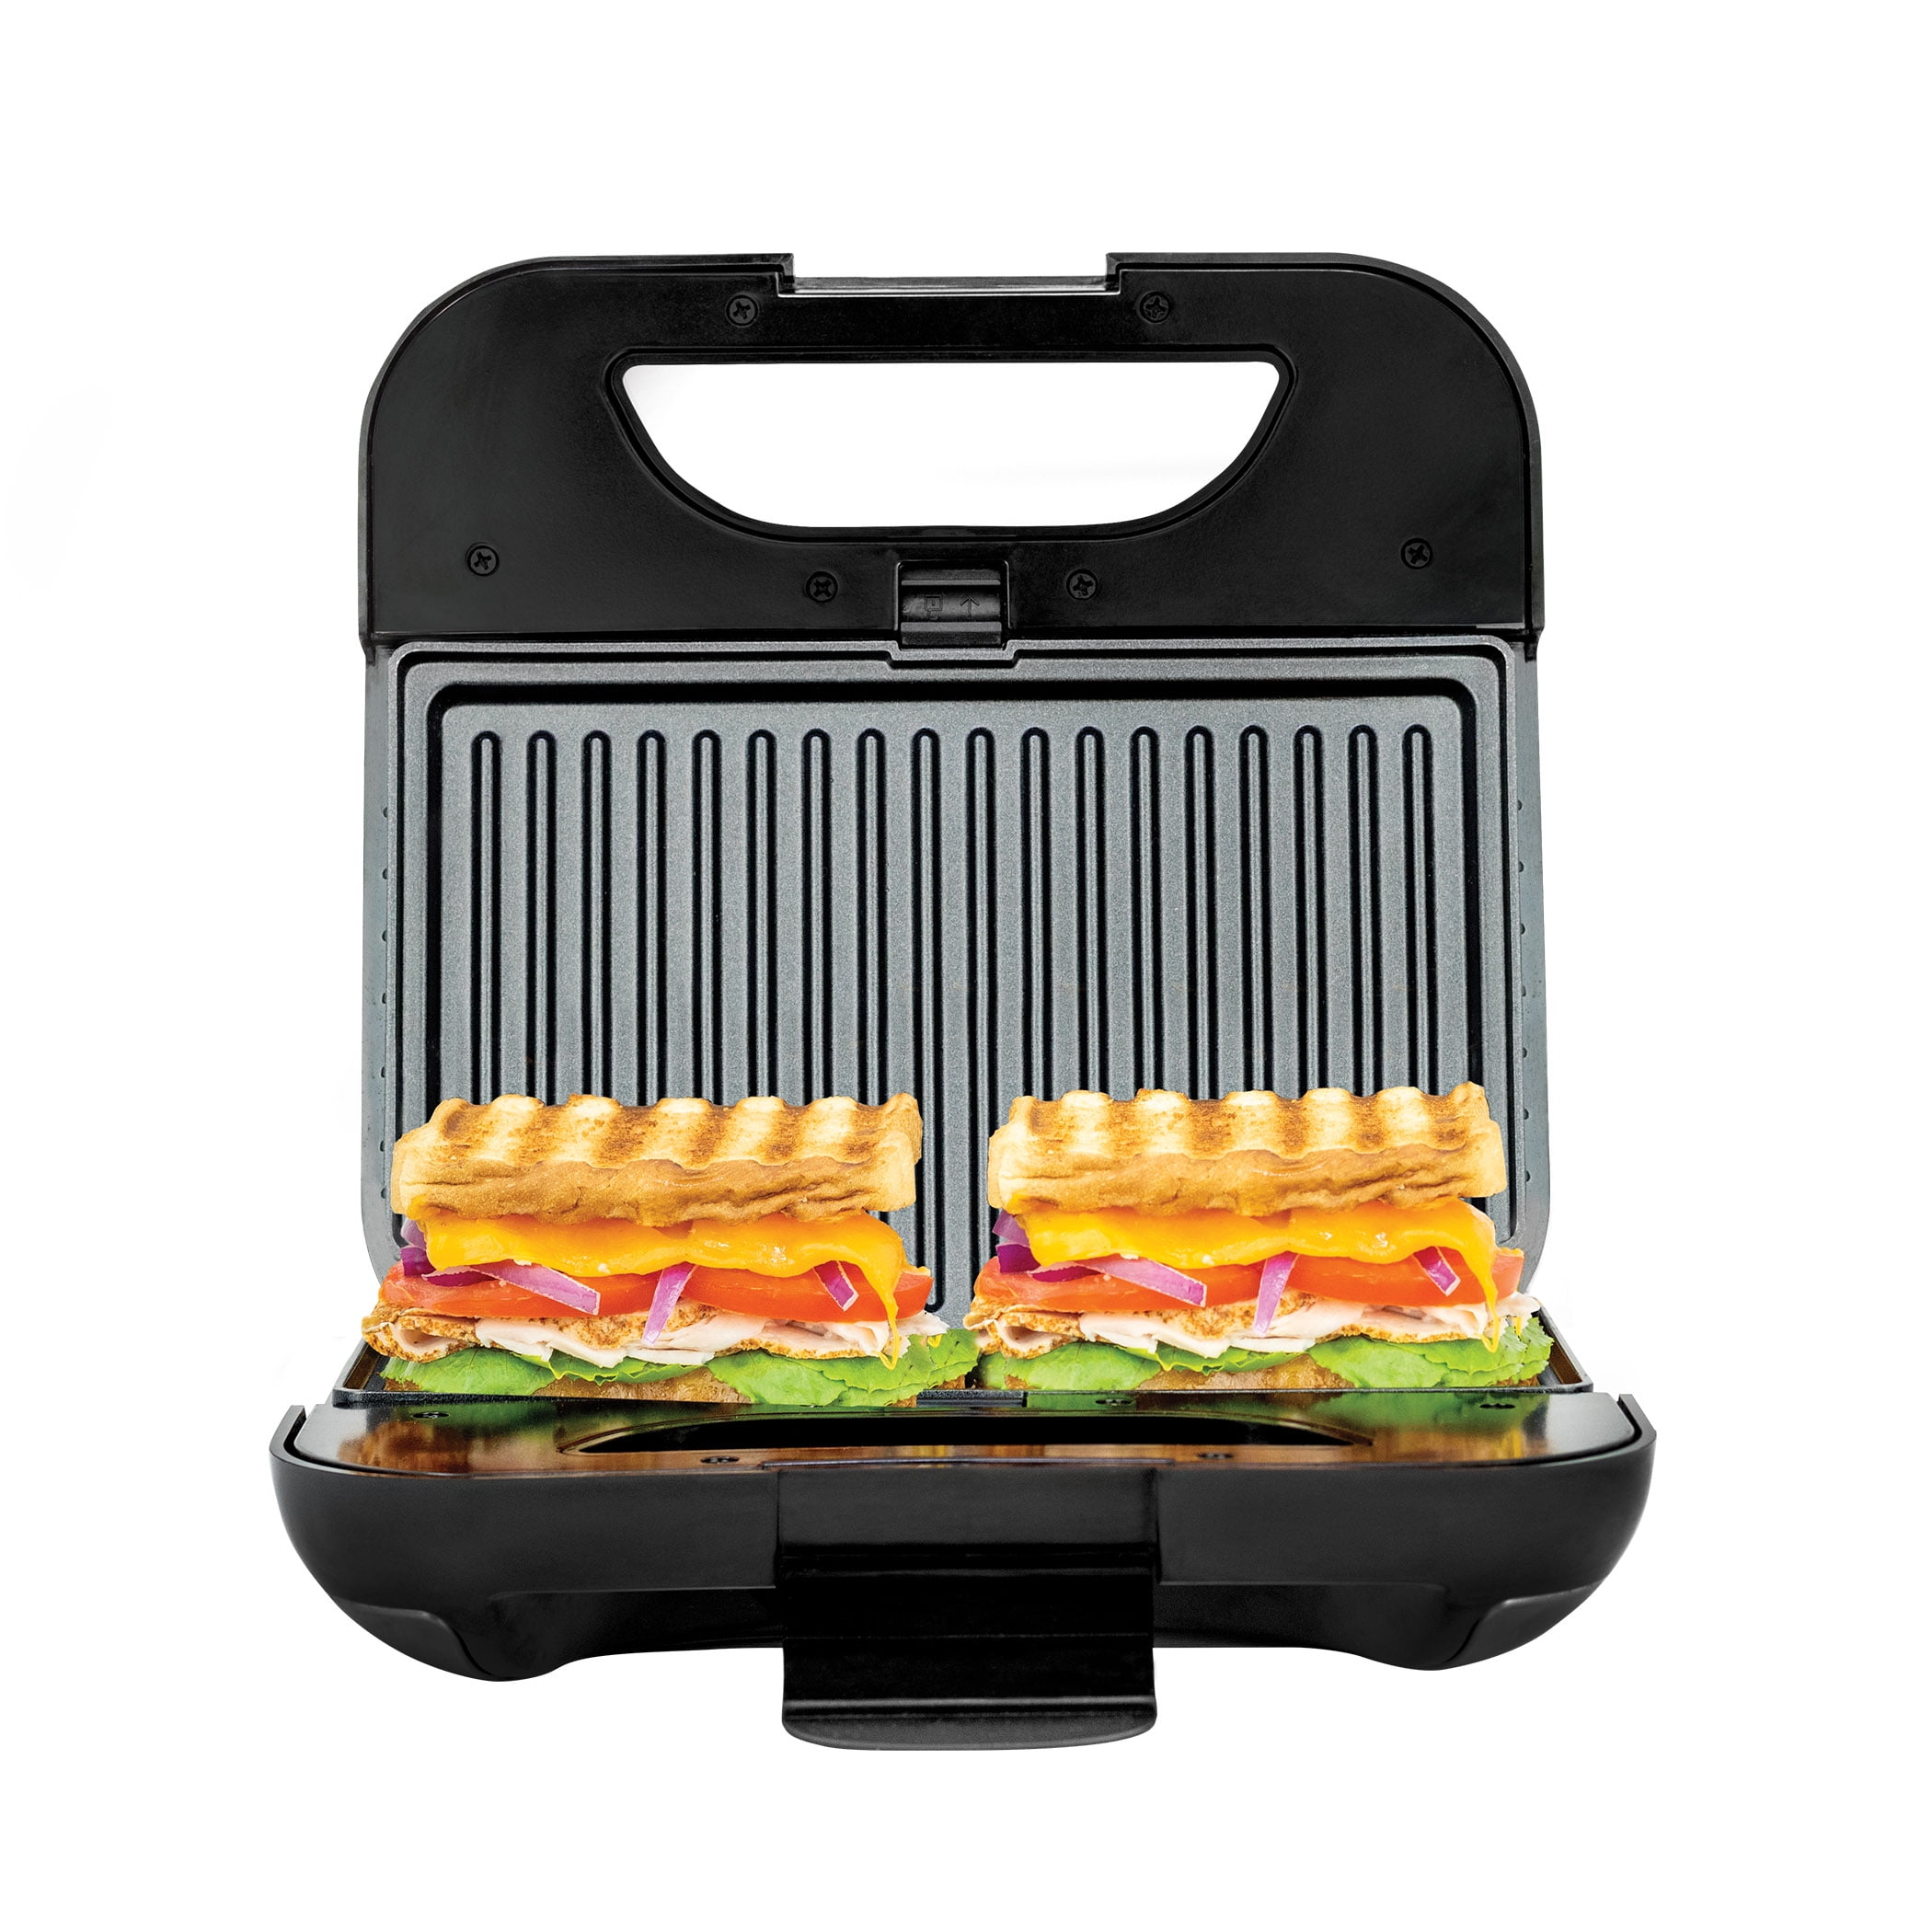 Picture of Kalorik 6037838 Stainless Steel Nonstick Surface 4-In-1 Sandwich Maker - Black & Silver